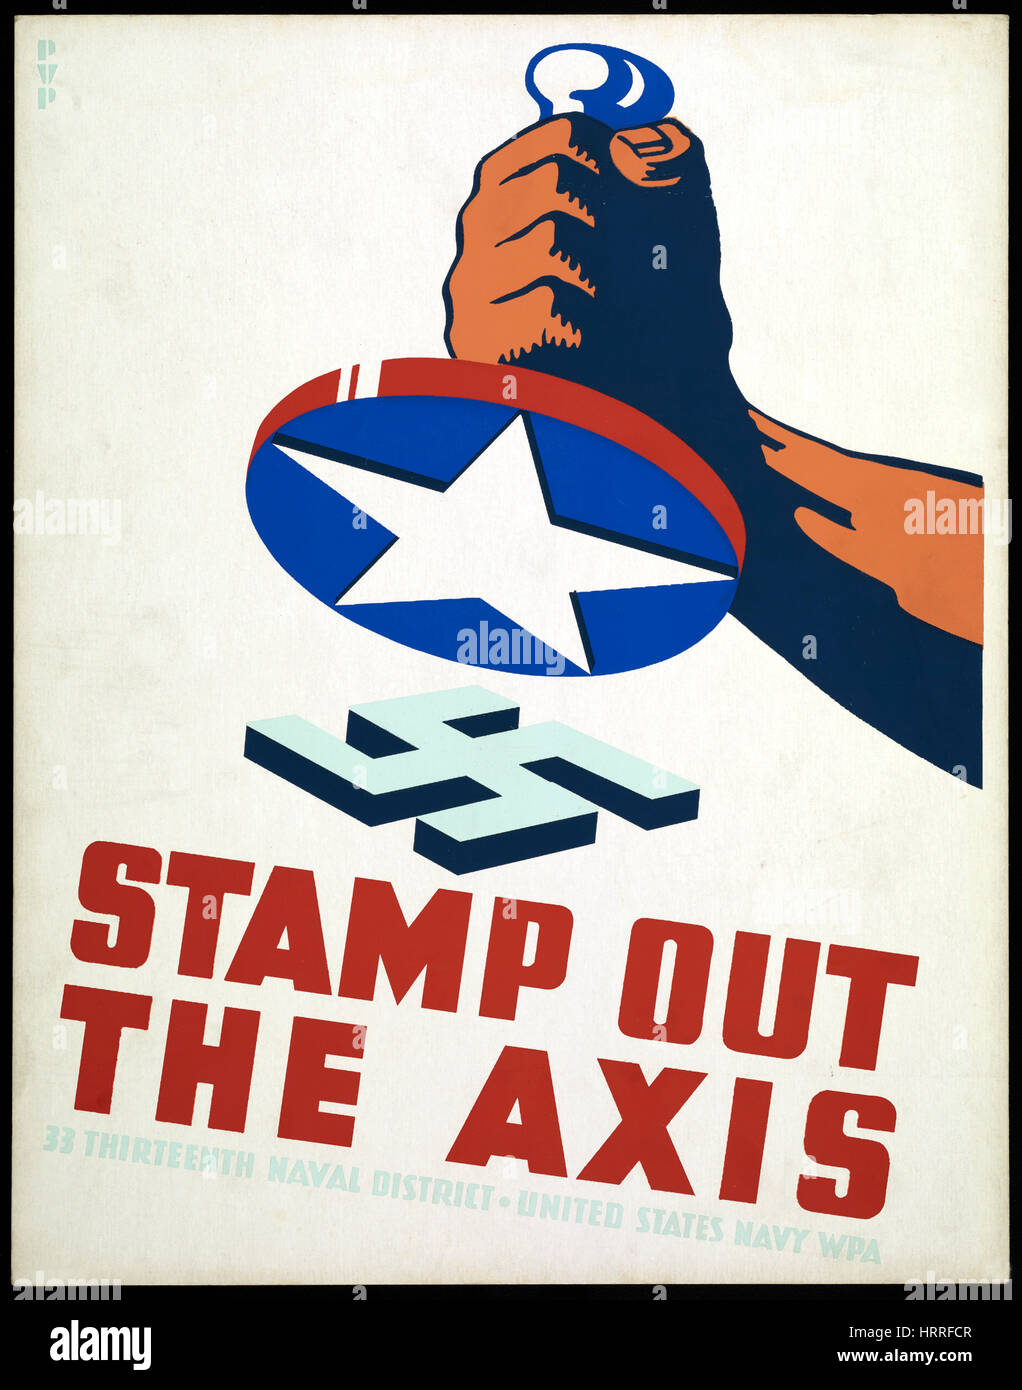 Fist Holding Stamp with American Star Ready to Stamp out Nazi Swastika, 'Stamp out the Axis', World War II Poster, by Phil von Phul, USA, 1941 Stock Photo